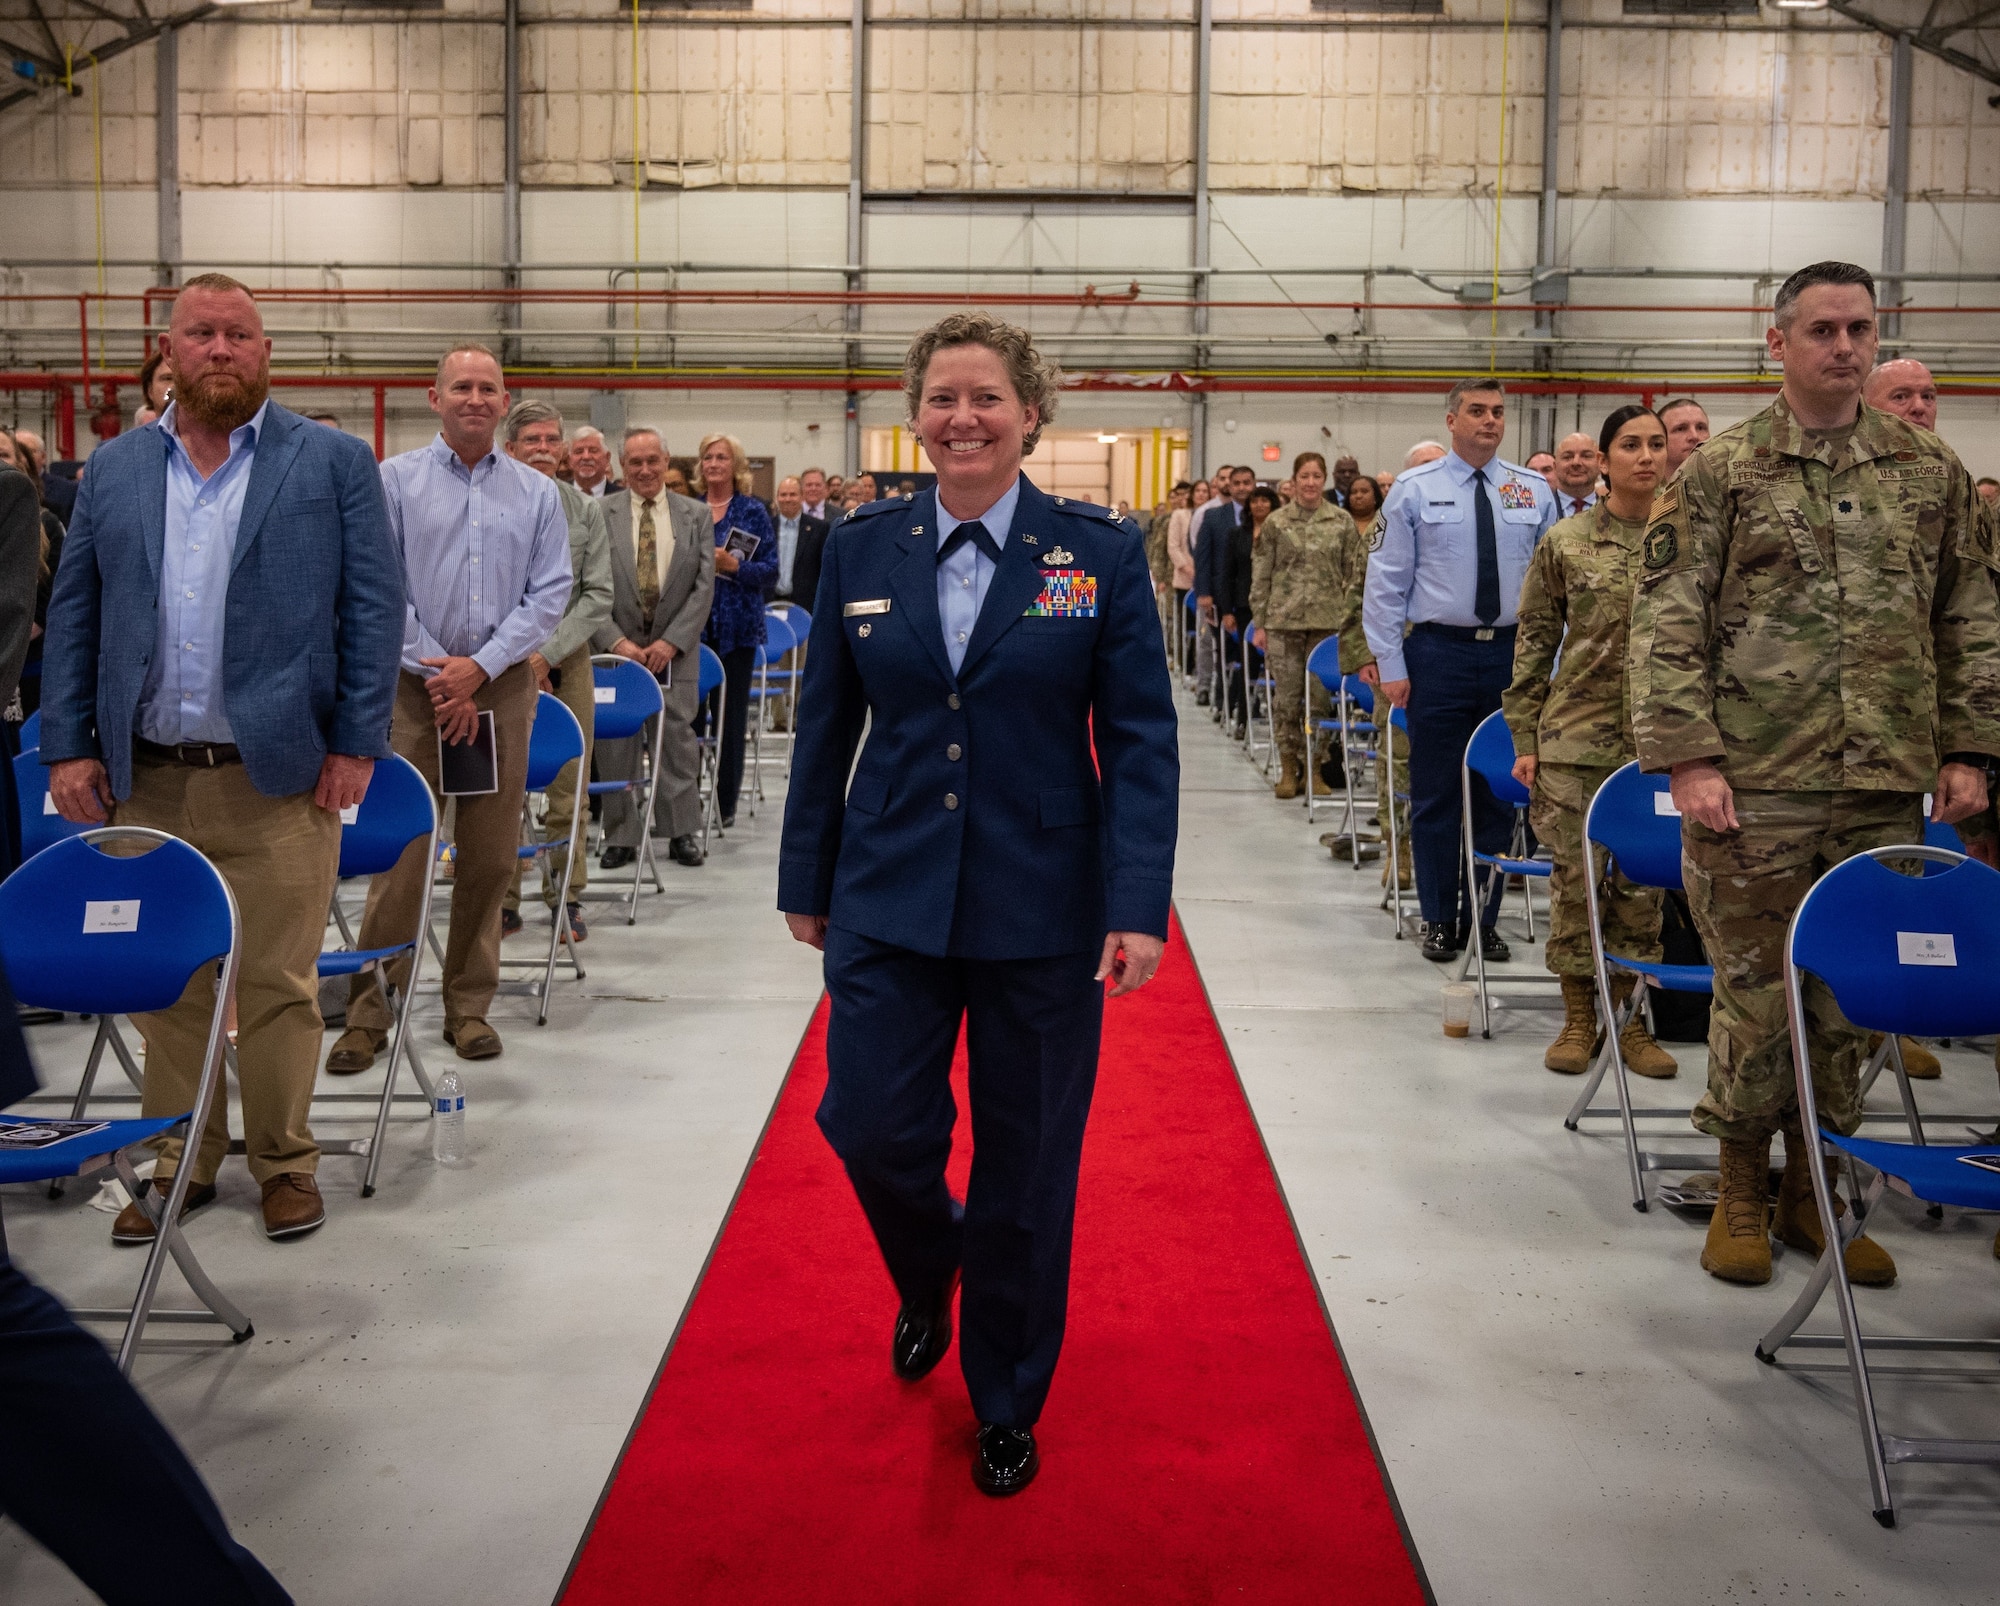 Col. Amy Bumgarner approaches the stage where she assumed command as the 20th Office of Special Investigations commander during the change of command ceremony on May 16, 2023, at Joint Base Andrews, Maryland. Bumgarner became the first female commander of OSI in its 75 year history. (U.S. Air Force Photo by Thomas Brading, OSI/PA)